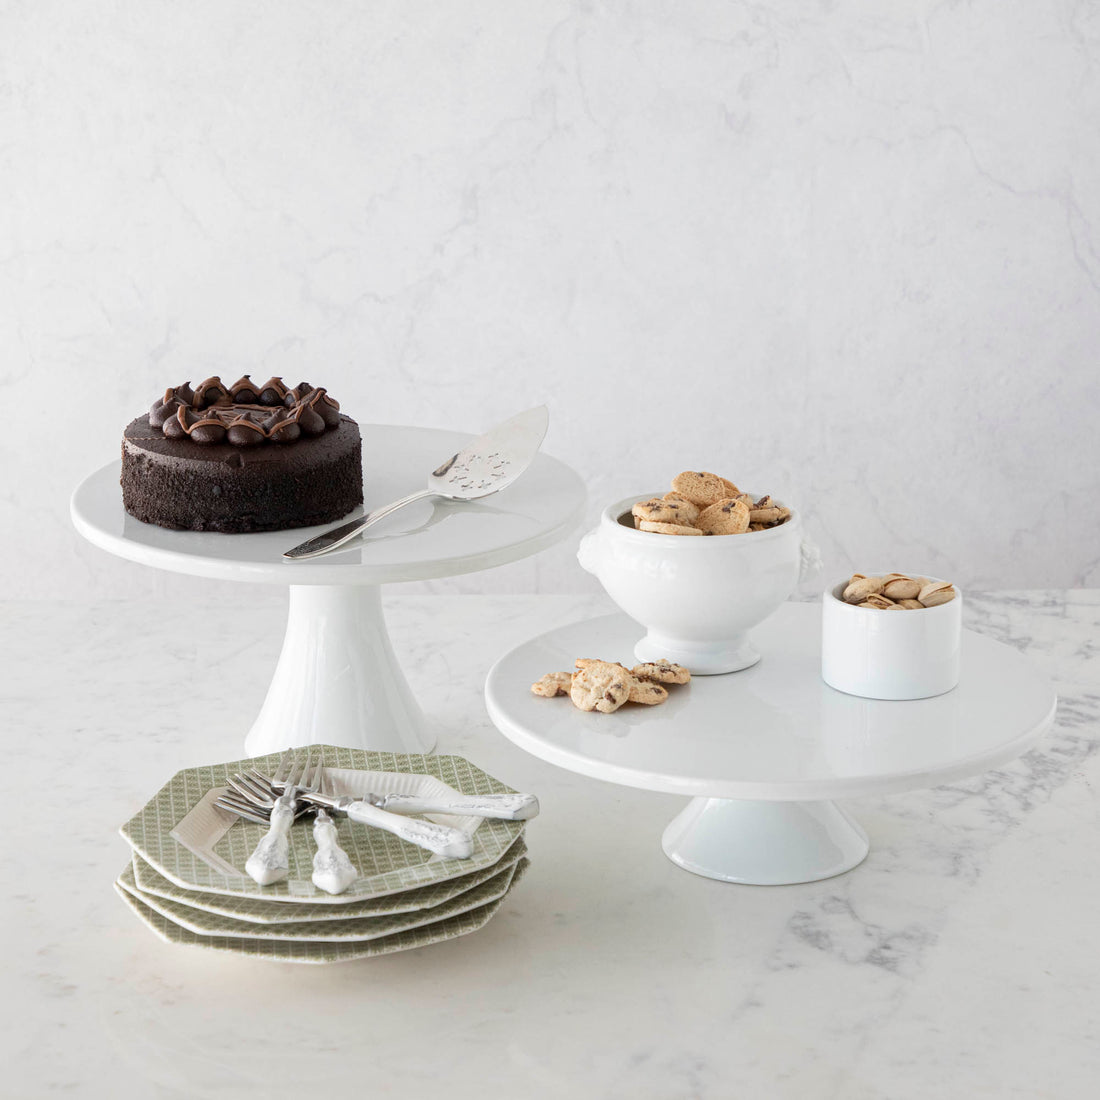 A chocolate cake, cookies, and nuts presented elegantly on BIA&